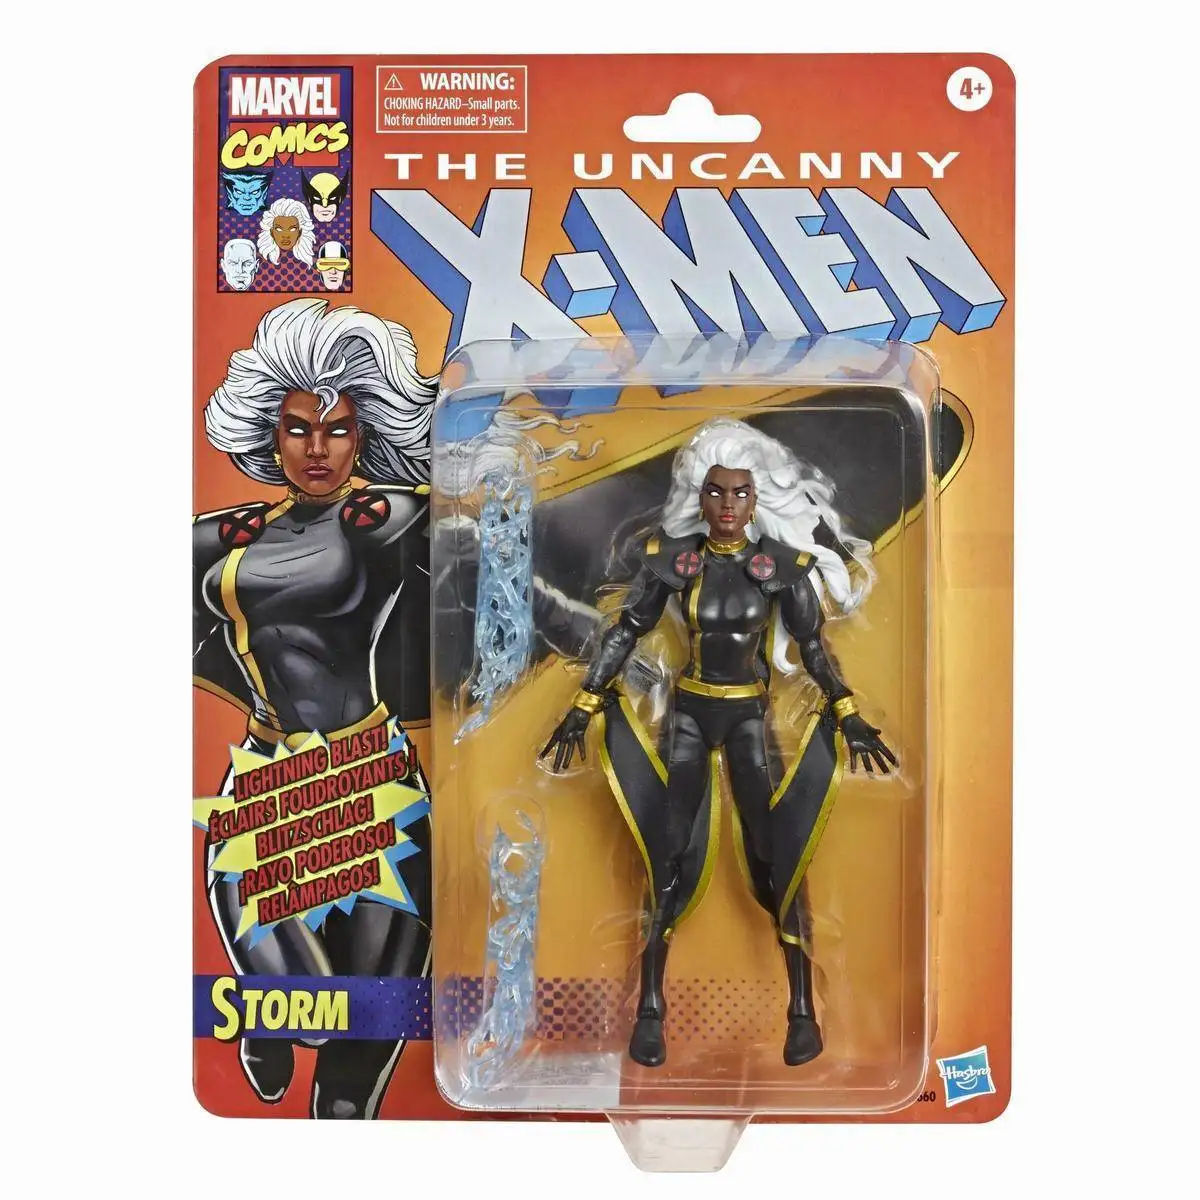 

Hasbro Marvel Legends 80Th Anniversary 6-Inch X-Men Wolverine Action Figure Pvc Model Gift for Kids Rogue Gambit Storm Boy Toy